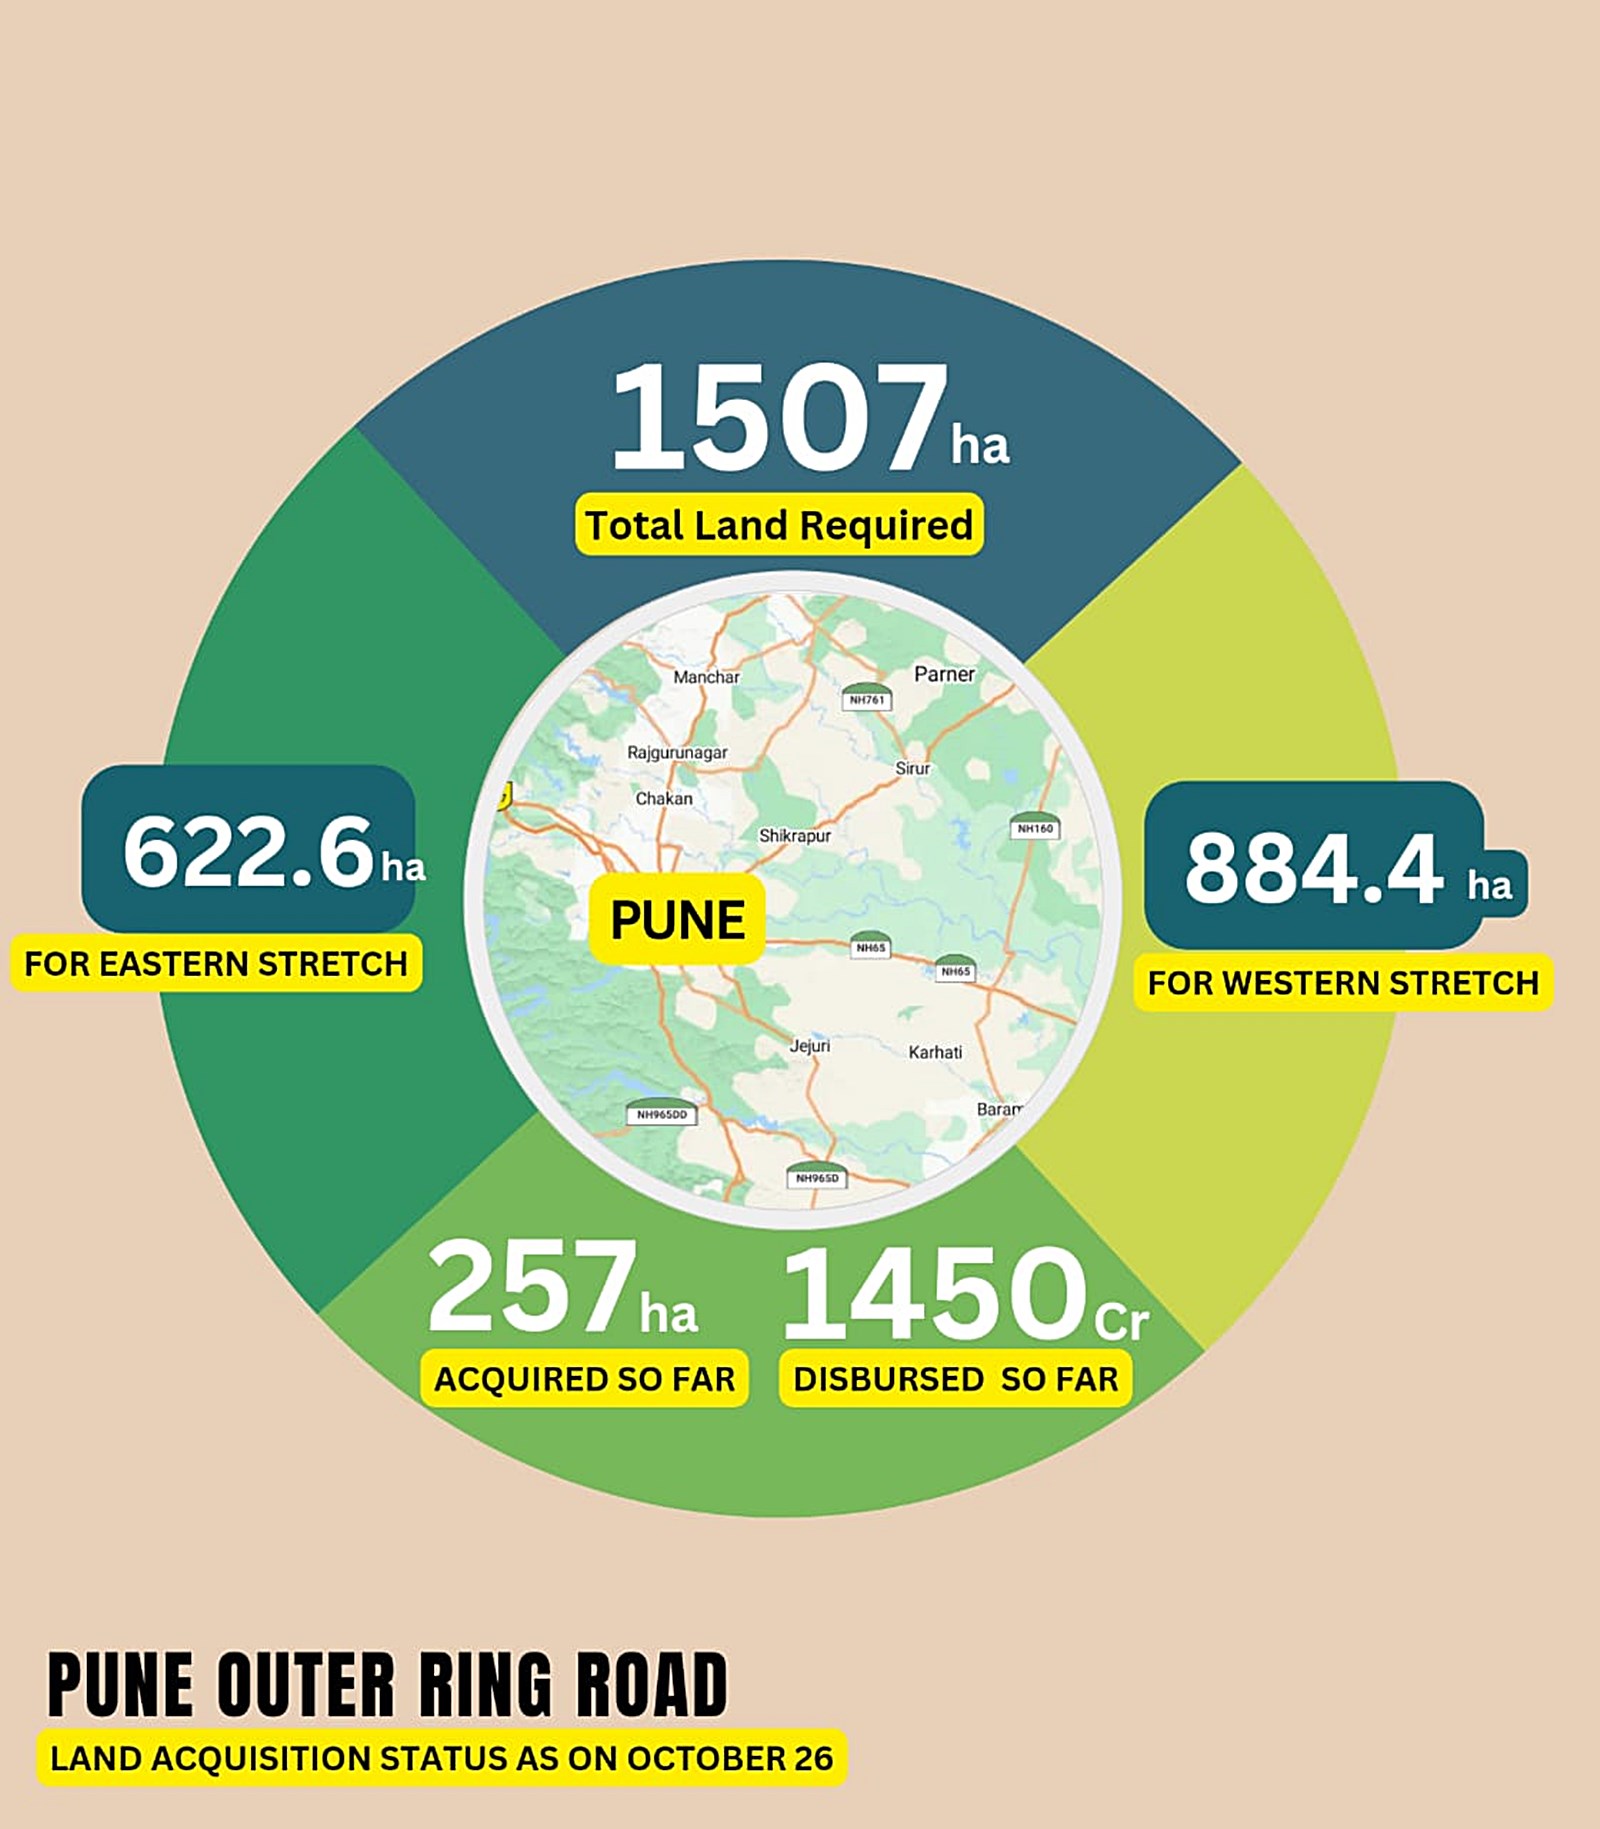 Maharashtra Budget: 170-km ring road planned for Pune at Rs 26,000 cr |  Economy & Policy News - Business Standard